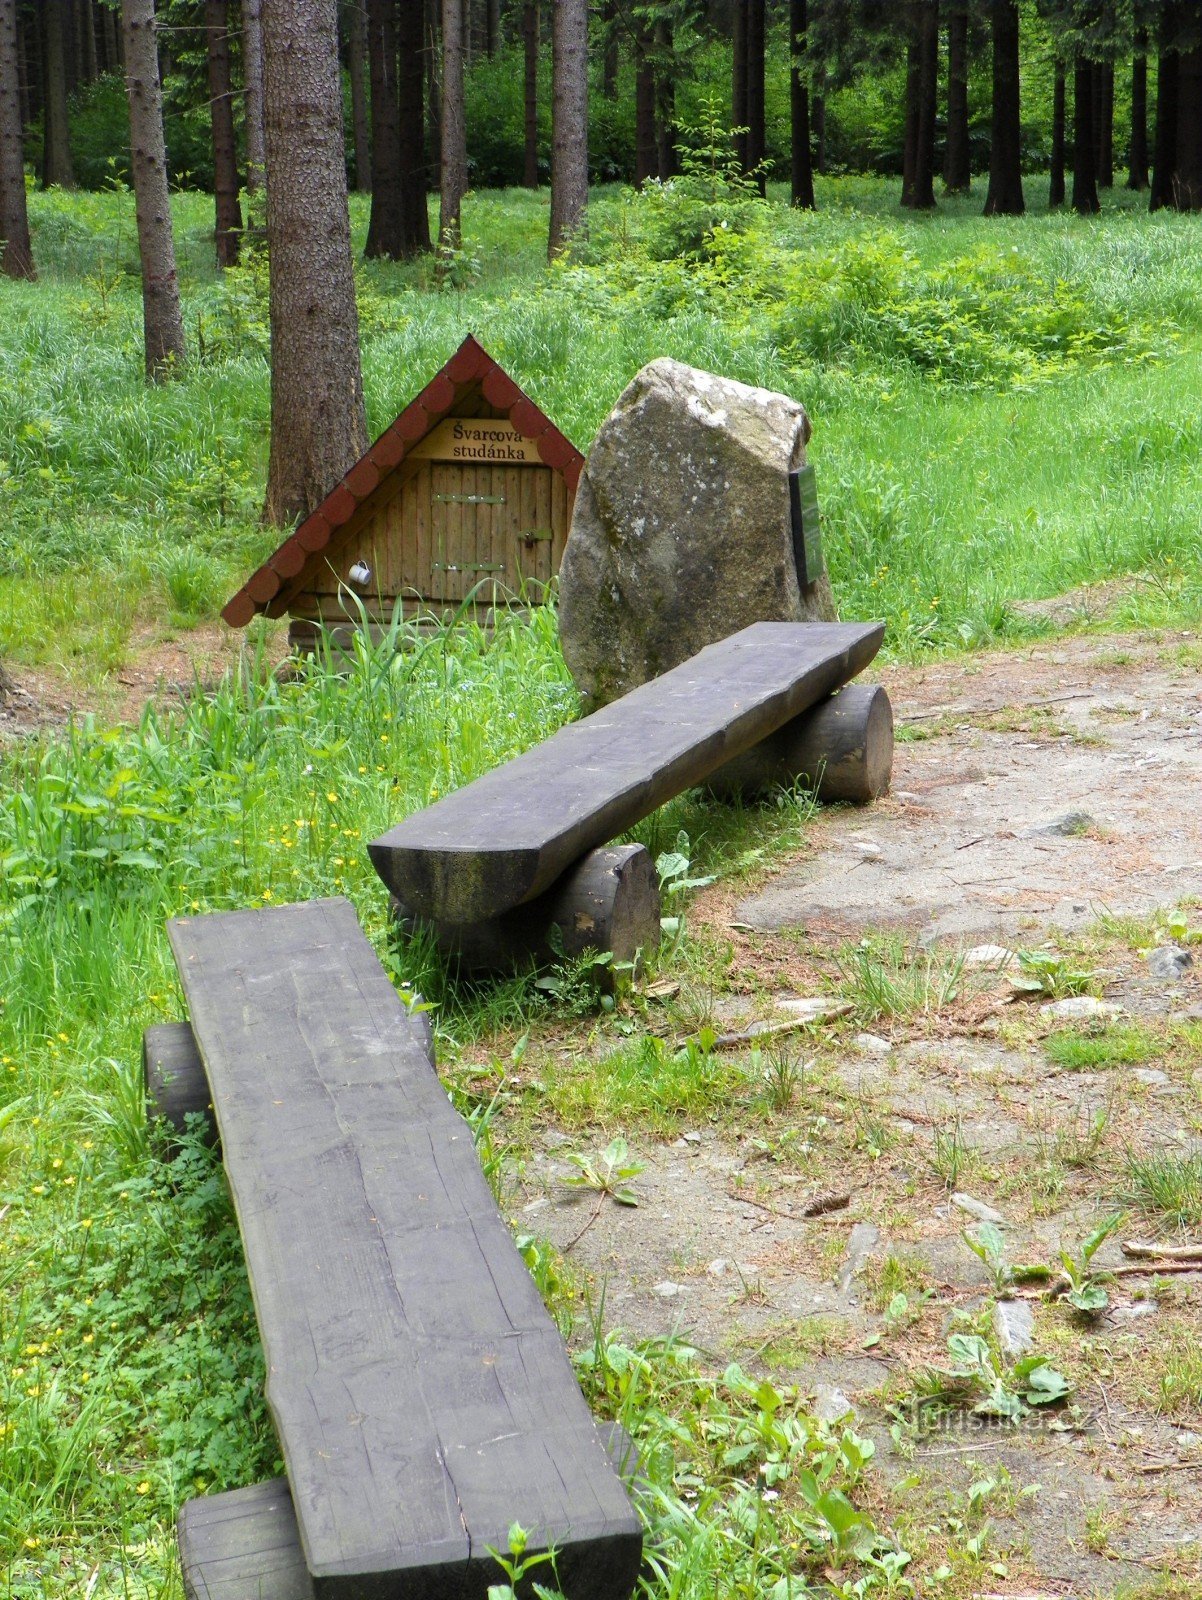 Benches by Švarcova well